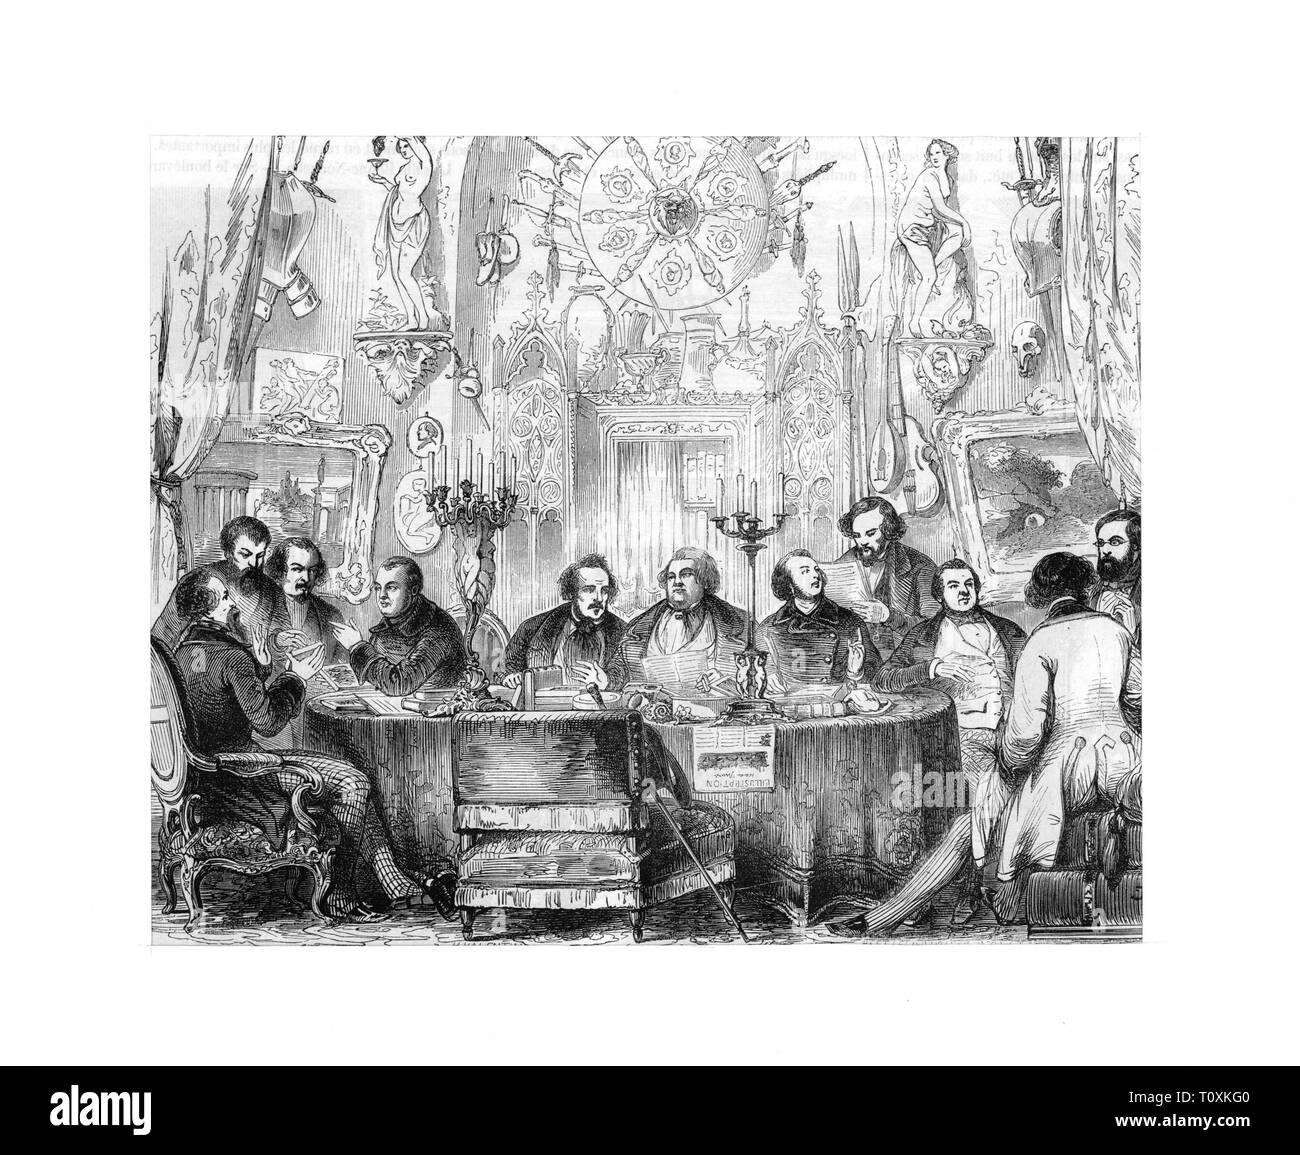 press / media, editorial office, wood engraving, by Henri Valentin (1820 - 1855), from: 'L'Illustration', Paris, 1851, Artist's Copyright has not to be cleared Stock Photo